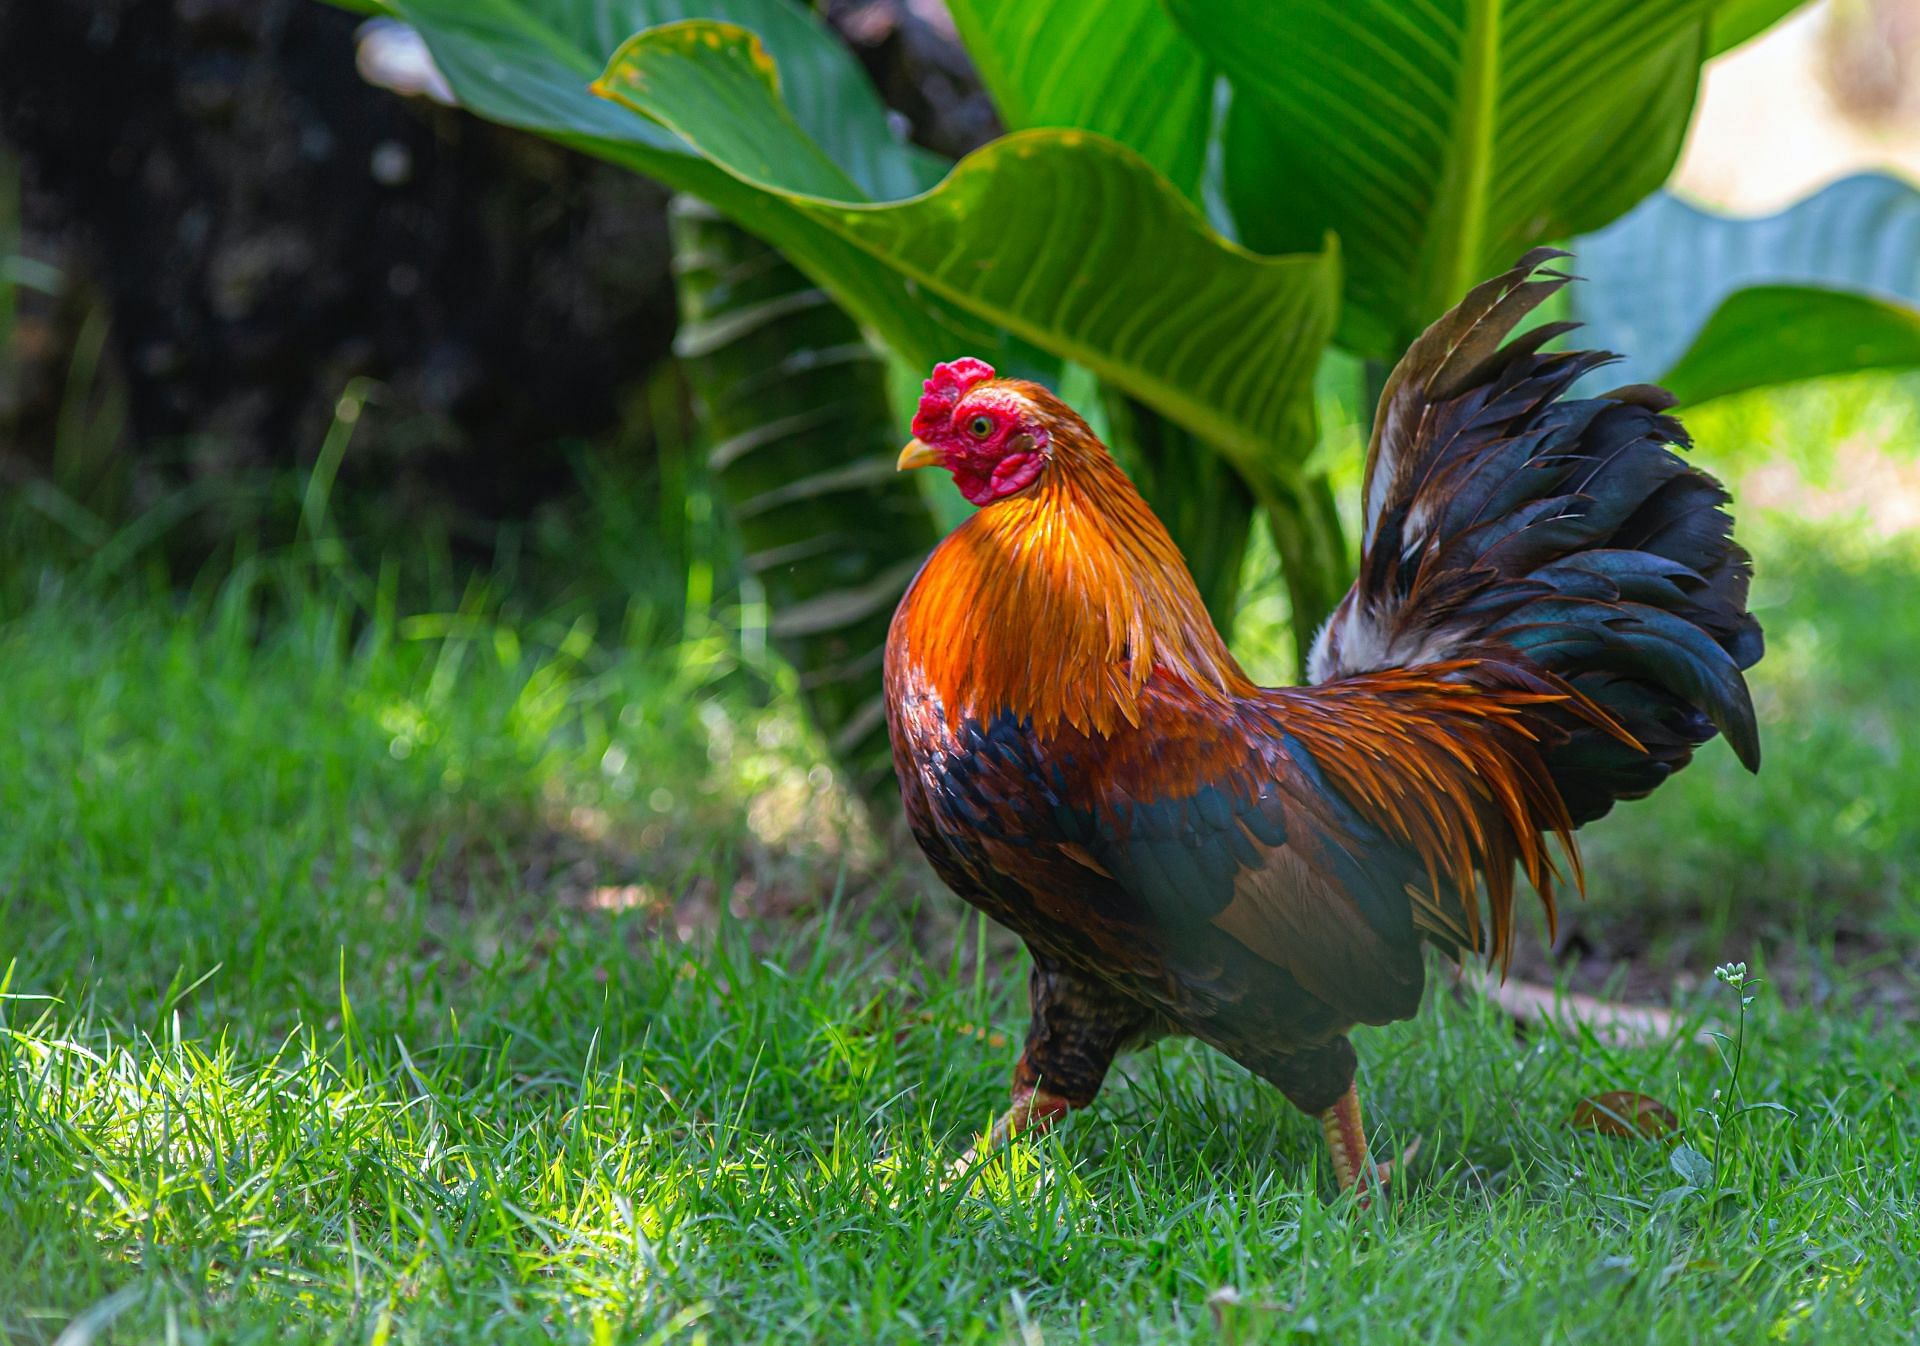 Help the rooster find the egg! (Photo by erik karits via pexels)